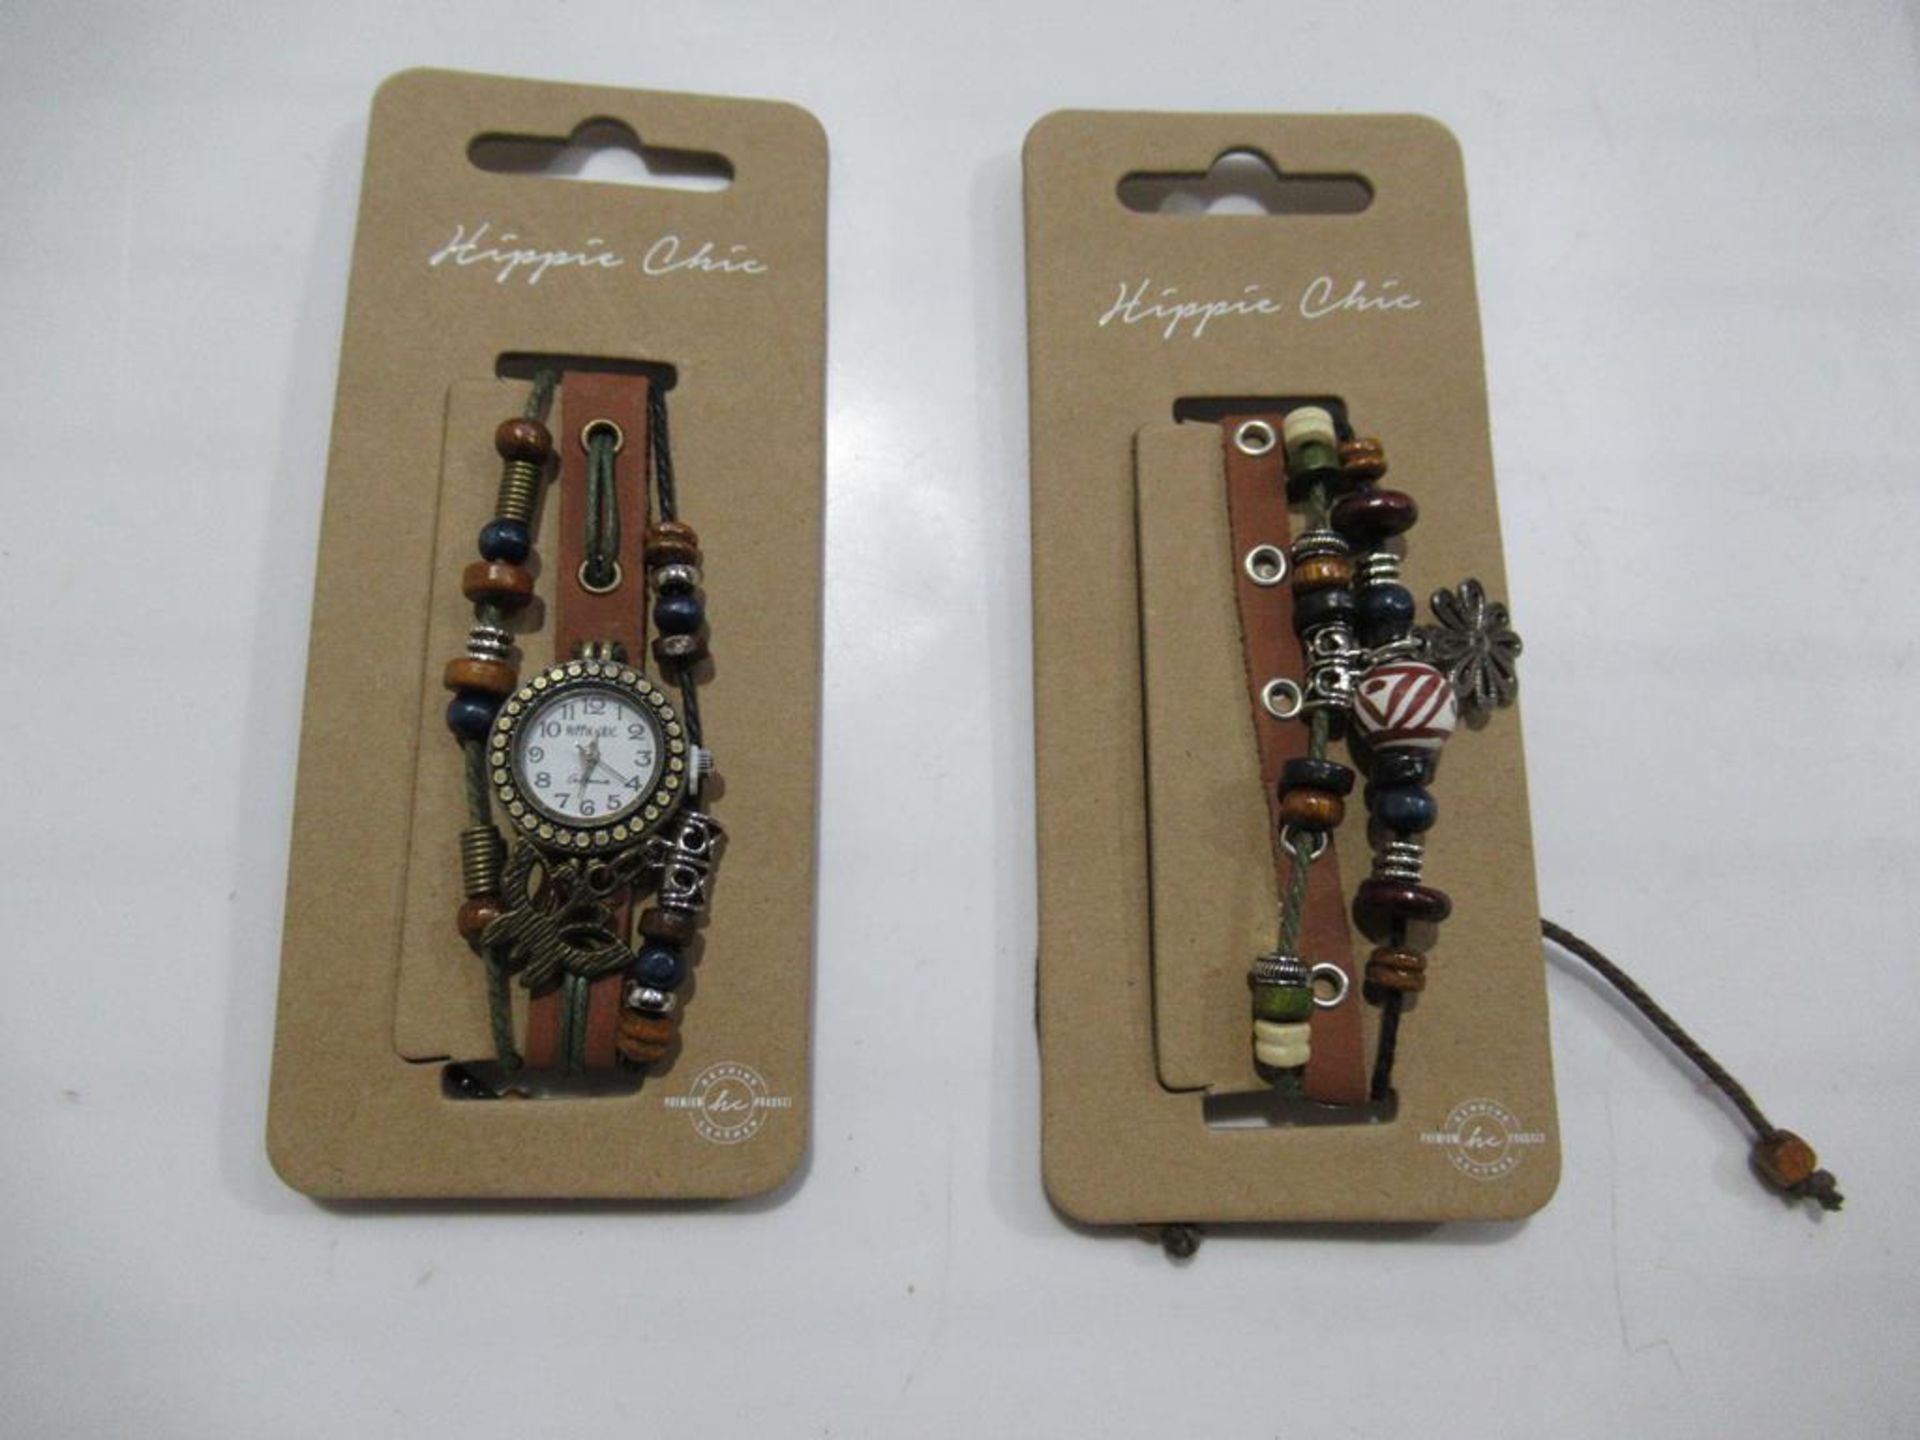 A box of Hippie Chic 'Boho' watches and bracelets